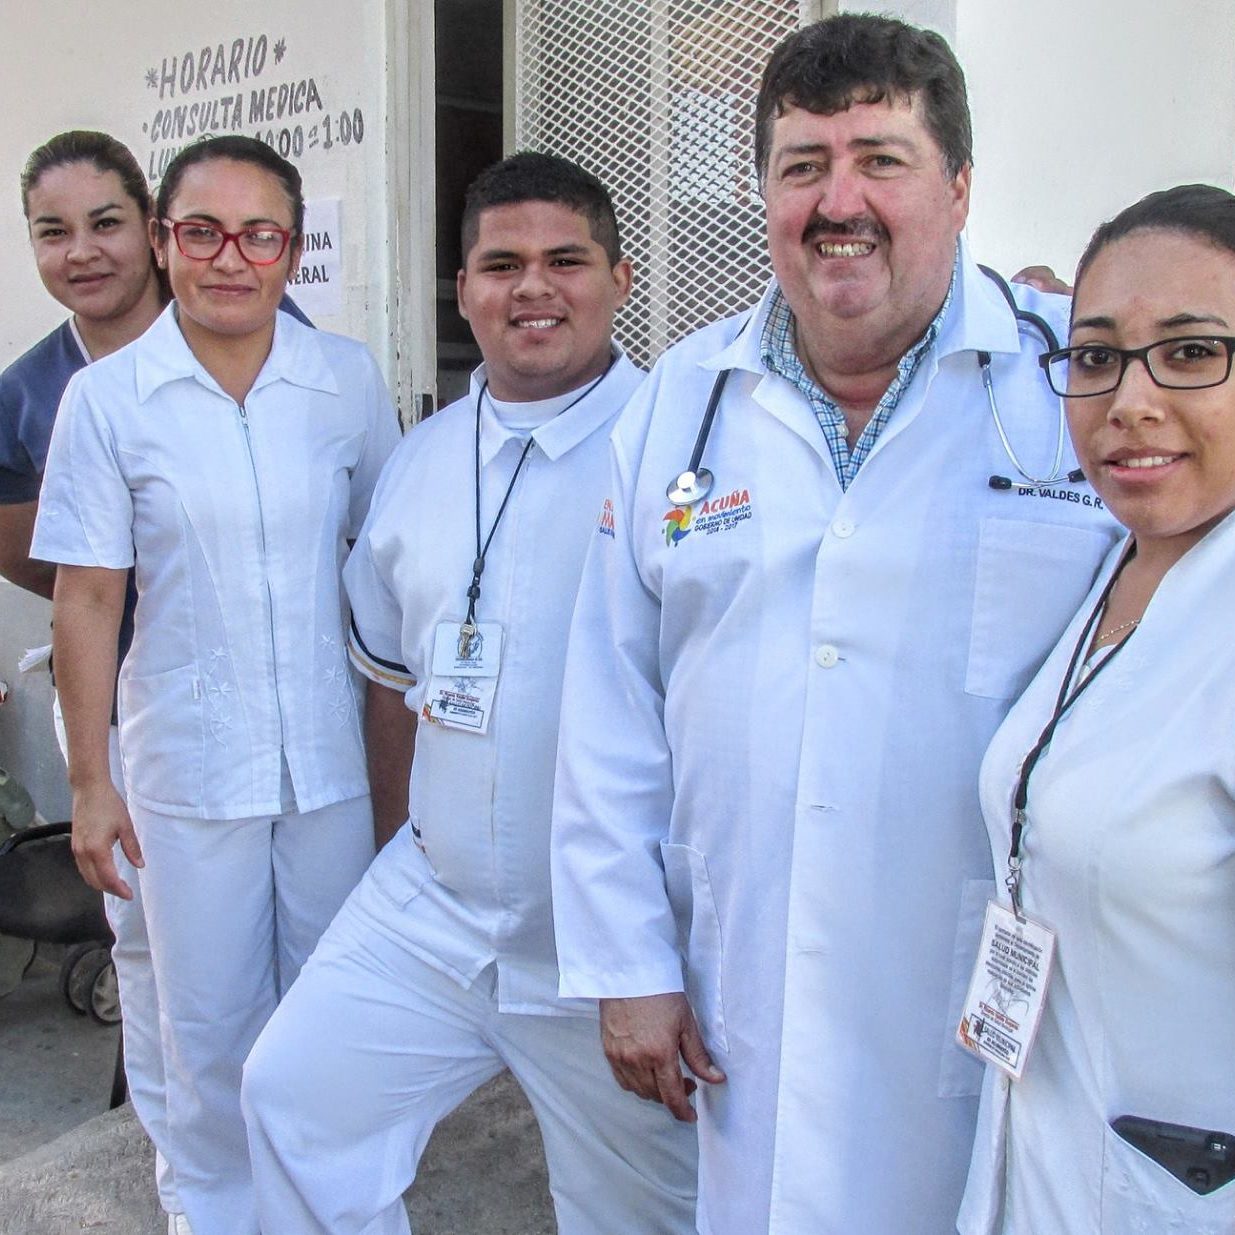 Grateful for all the support of Dr. Ricardo Valdes and staff with 2016 Acuña Medical Clinic.